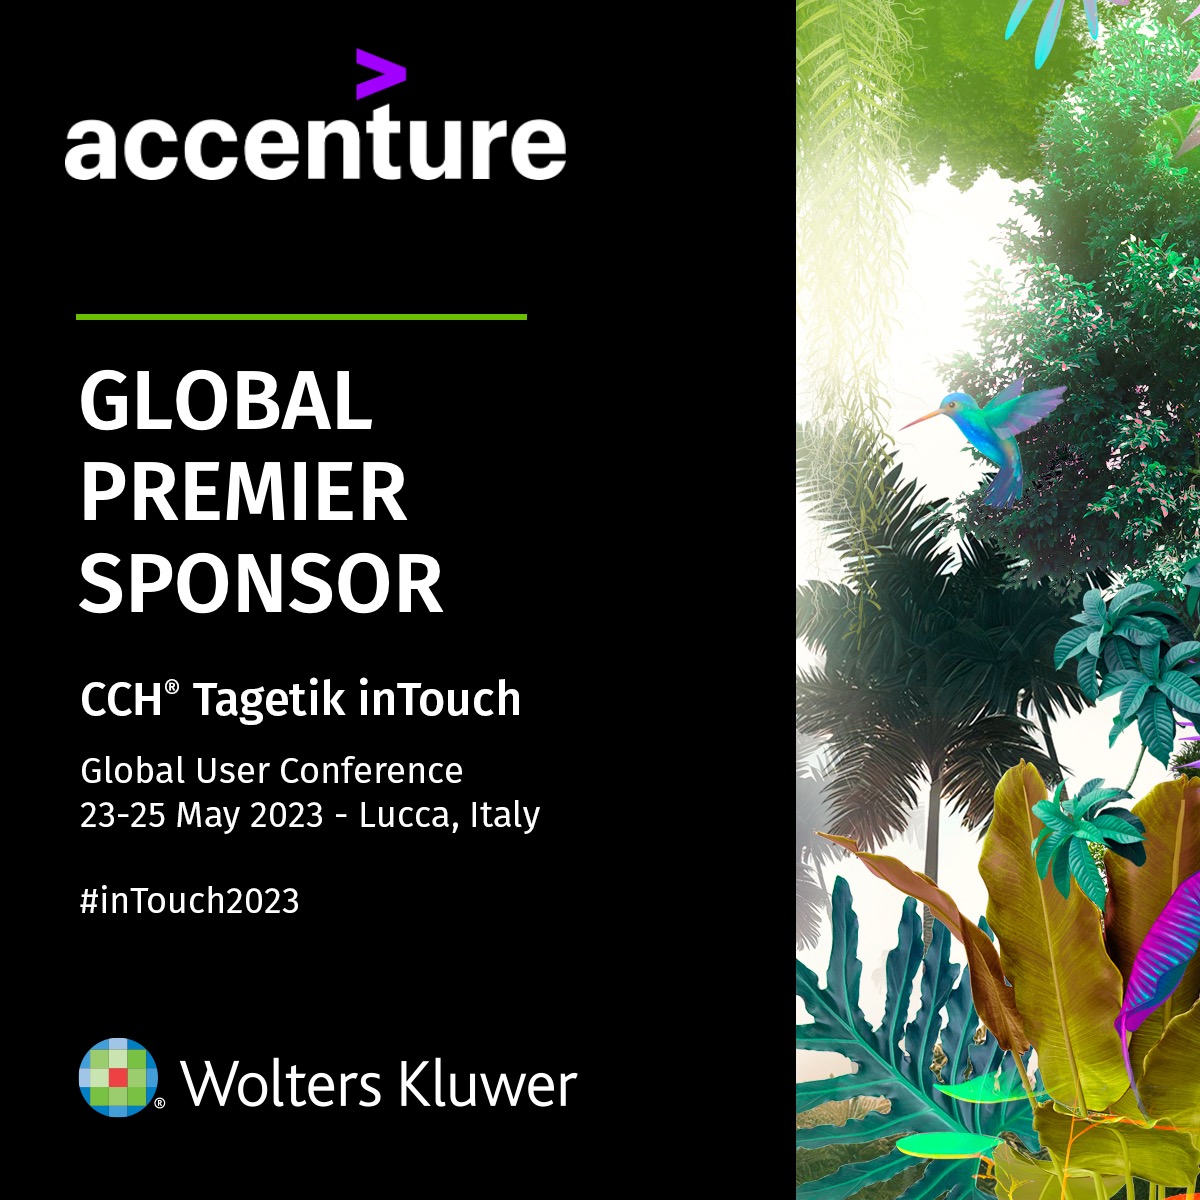 We are happy to announce that Accenture will be one of the Global Premier Sponsor at the CCH Tagetik inTouch 2023. Come to visit their booth during the event! bit.ly/3mipk86

#CCHTagetik #inTouch2023 #LeadTheChange